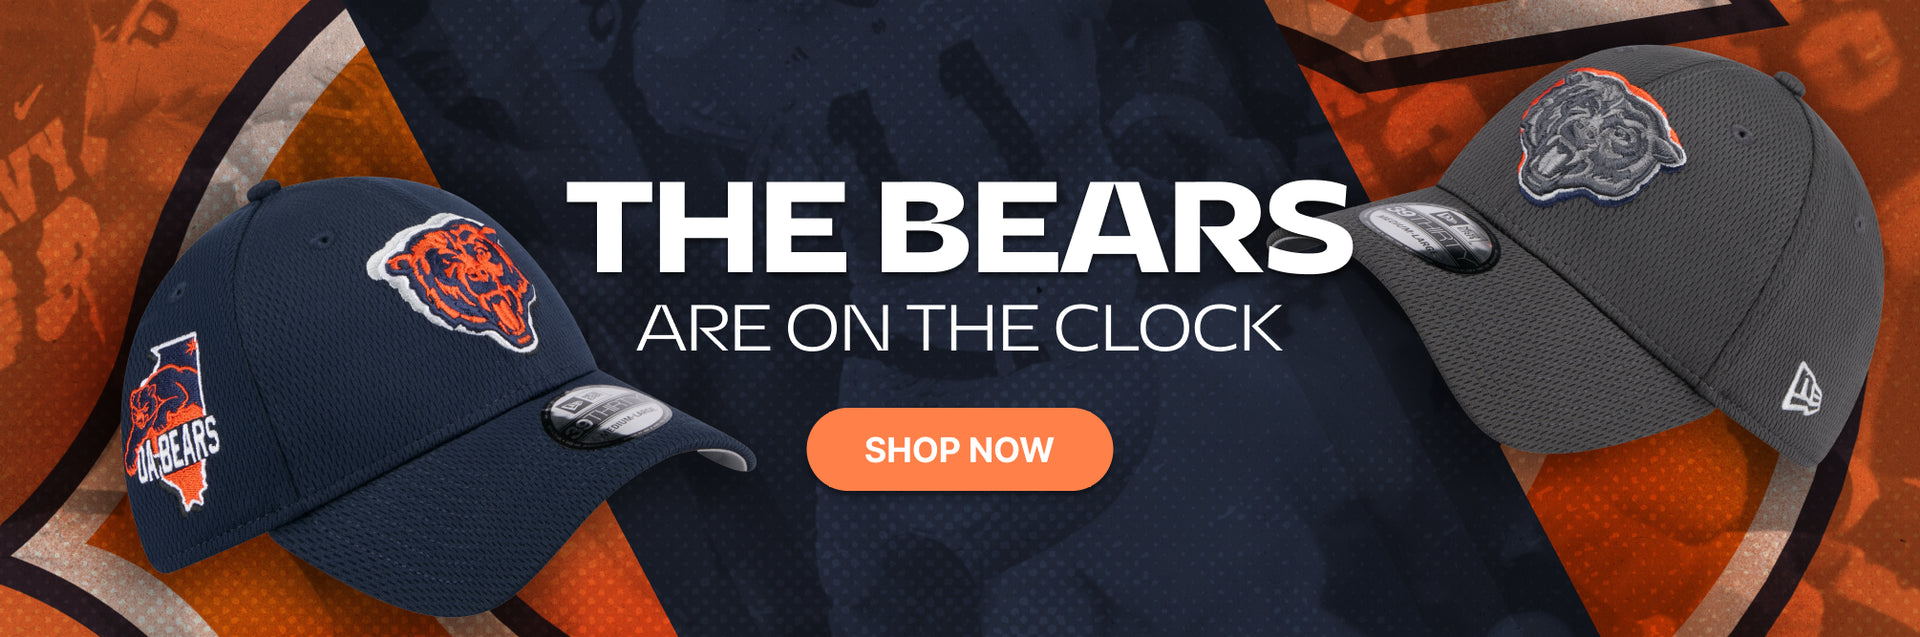 the bears are on the clock